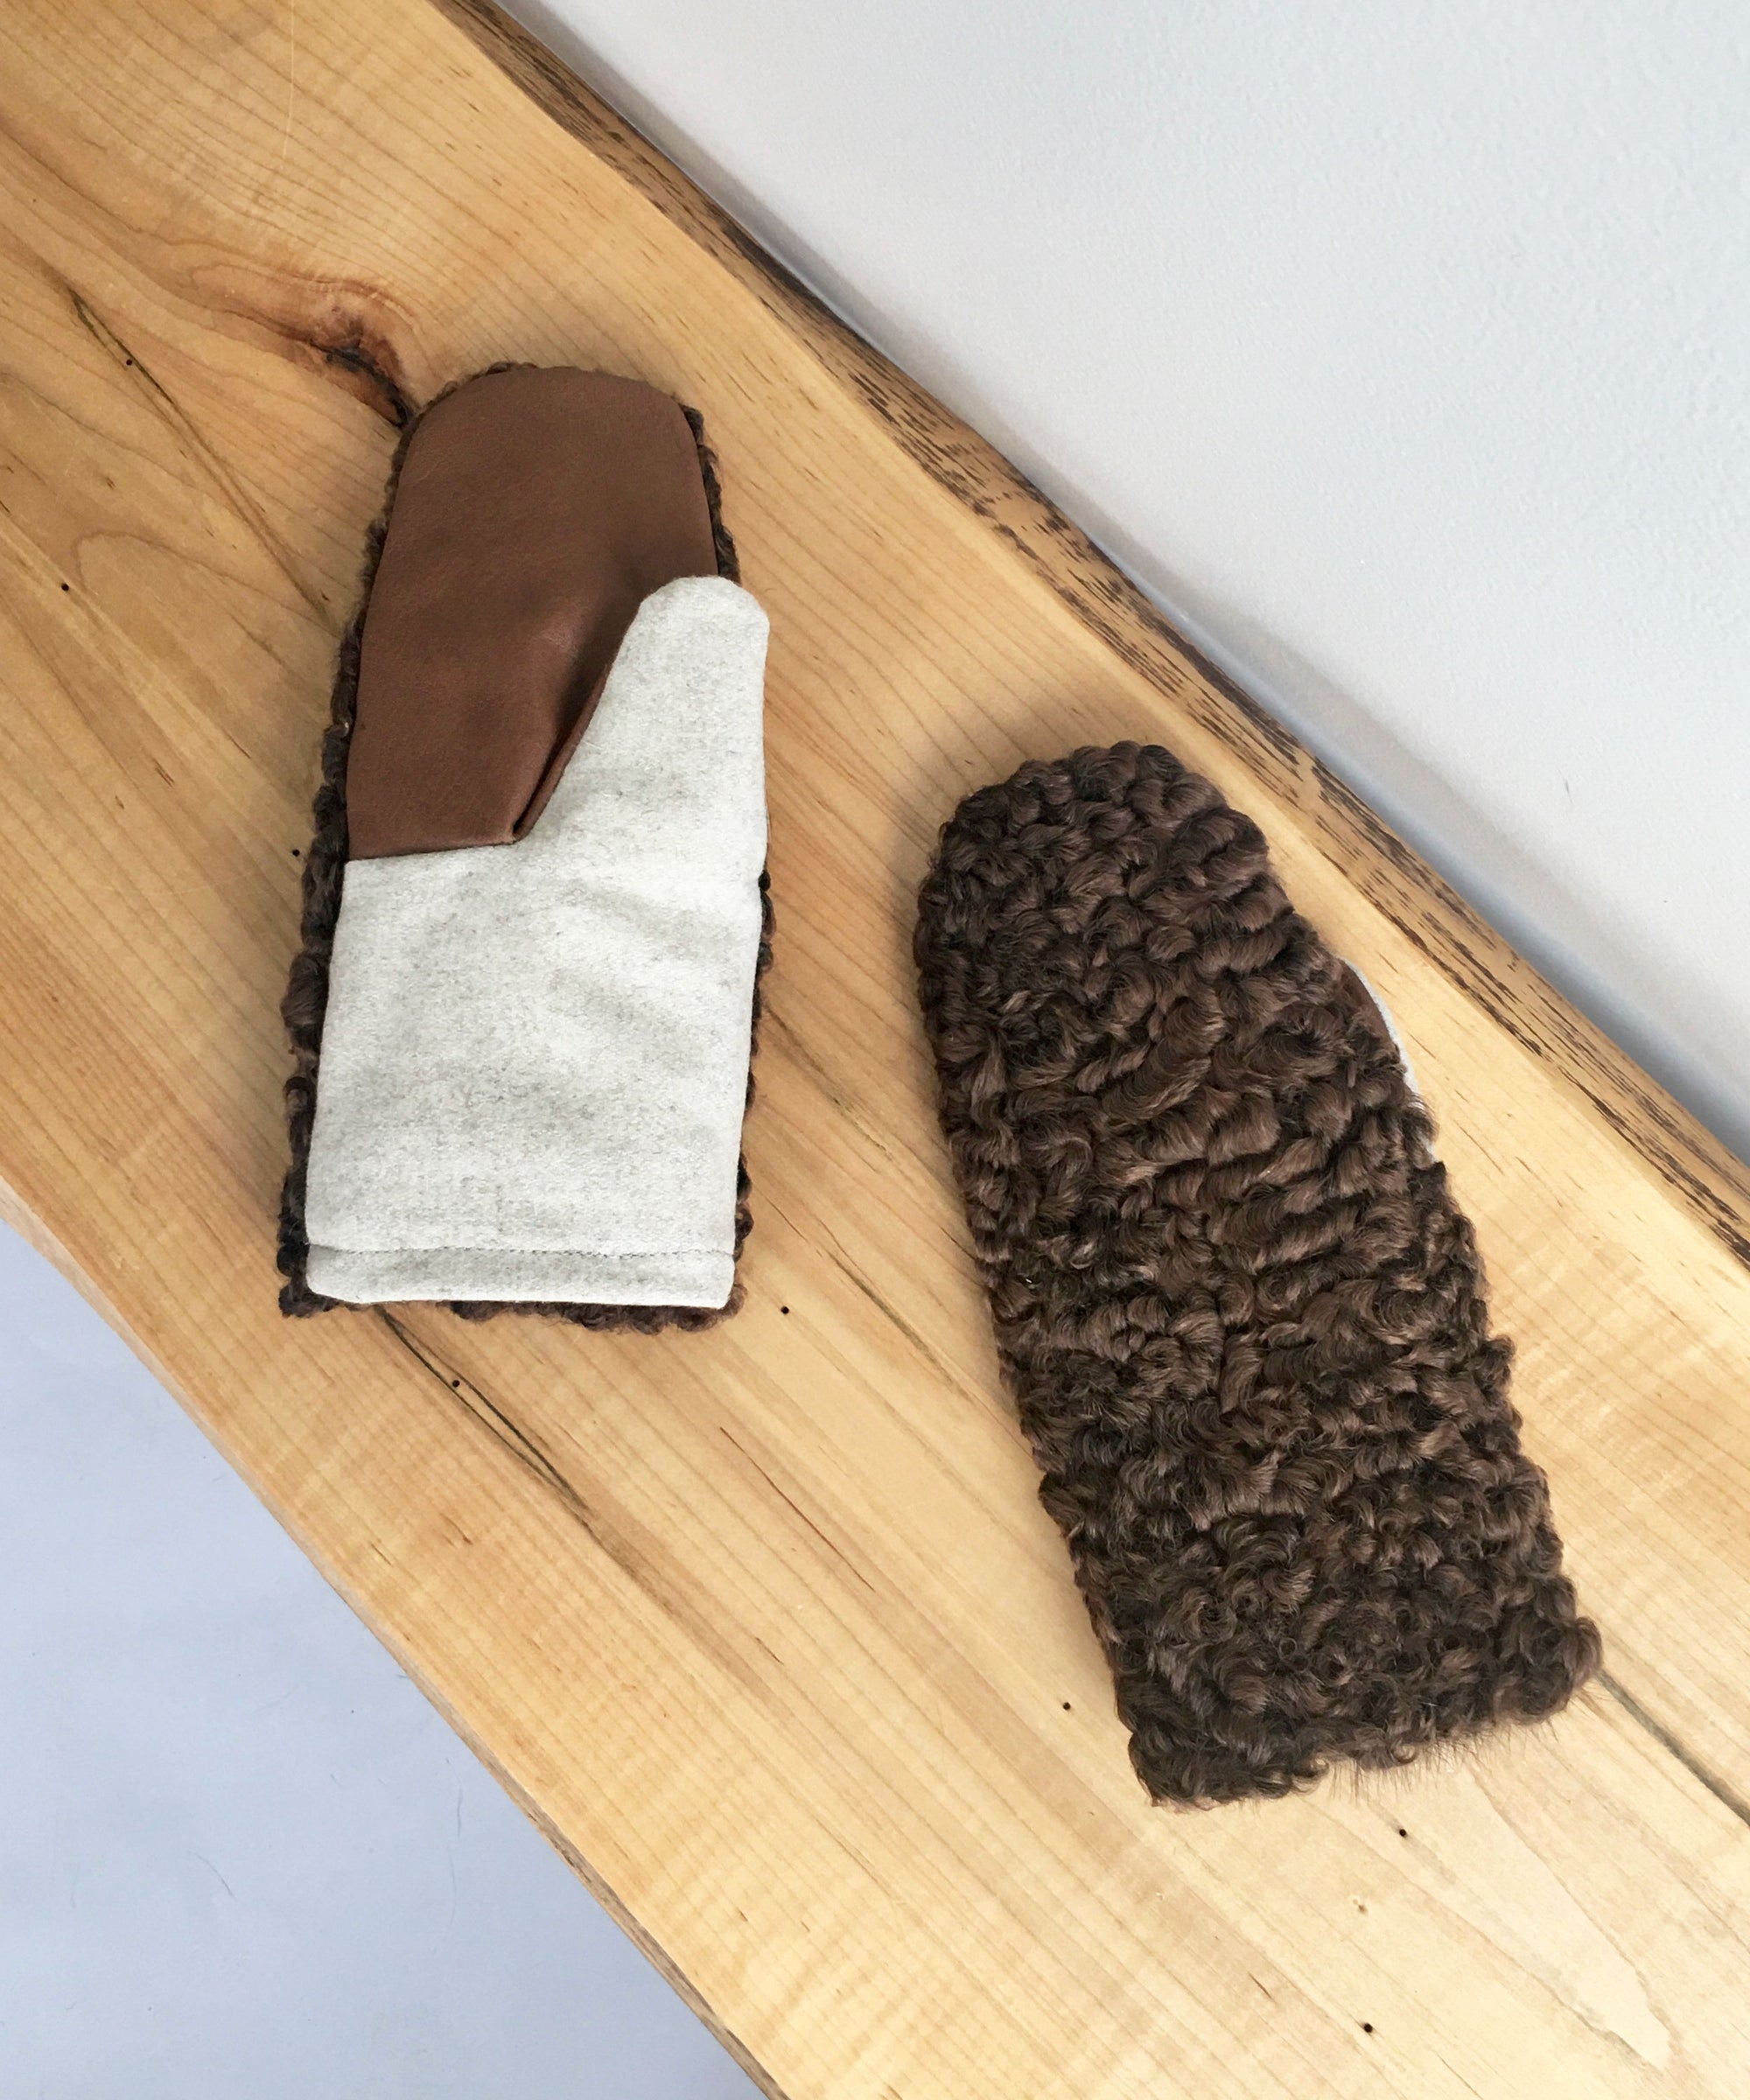 Windproof Winter Mittens for Extreme Cold Weather, -40 Degree Mittens Canada made from reclaimed fur coats, brown persian lamb astrakan fur